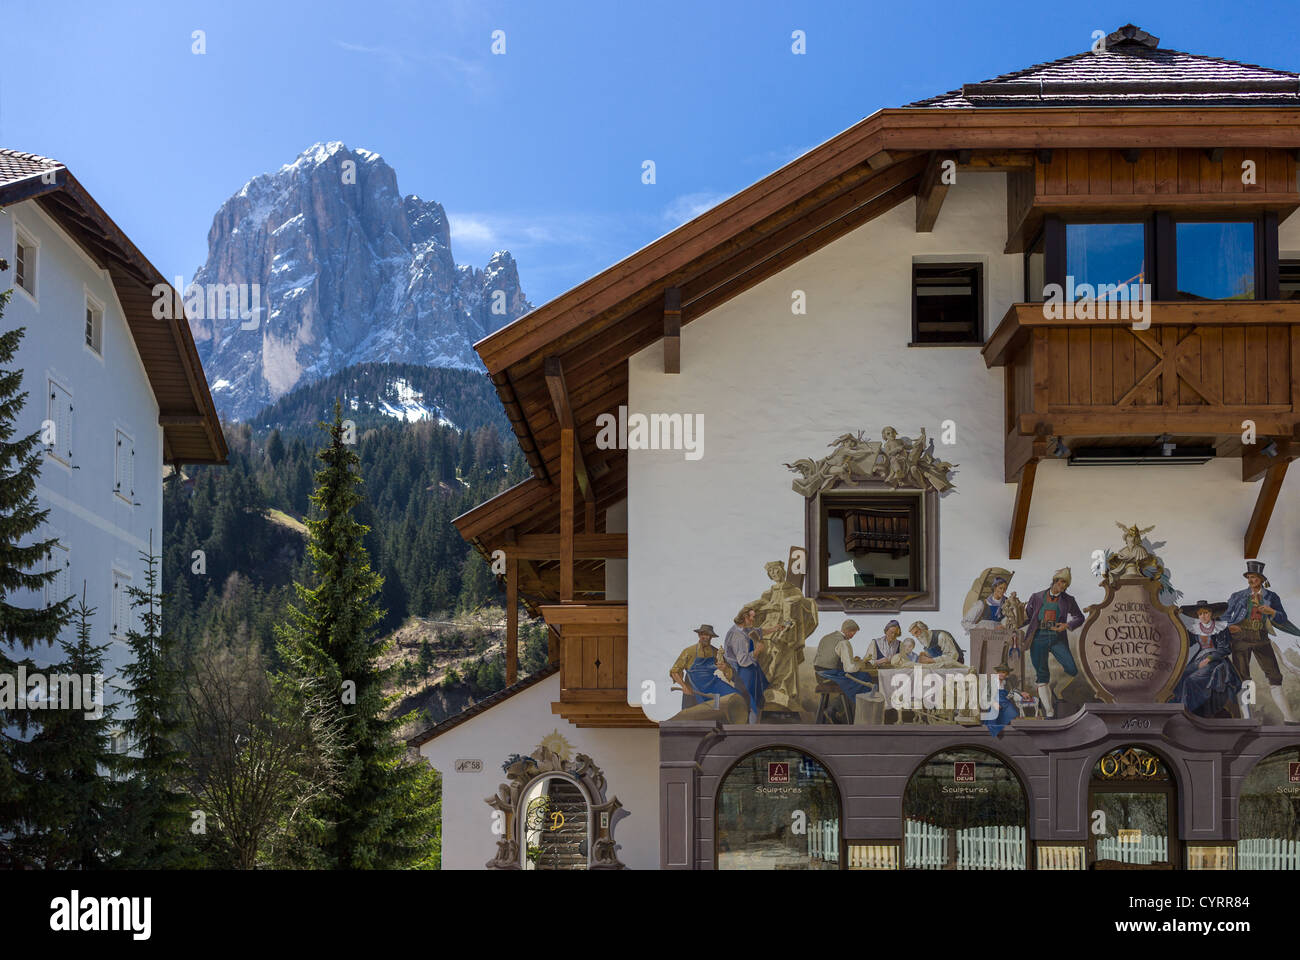 Italy, Dolomites, Santa Cristina, a fully decorated house of a craft store with the Sassolungo in the background. Stock Photo